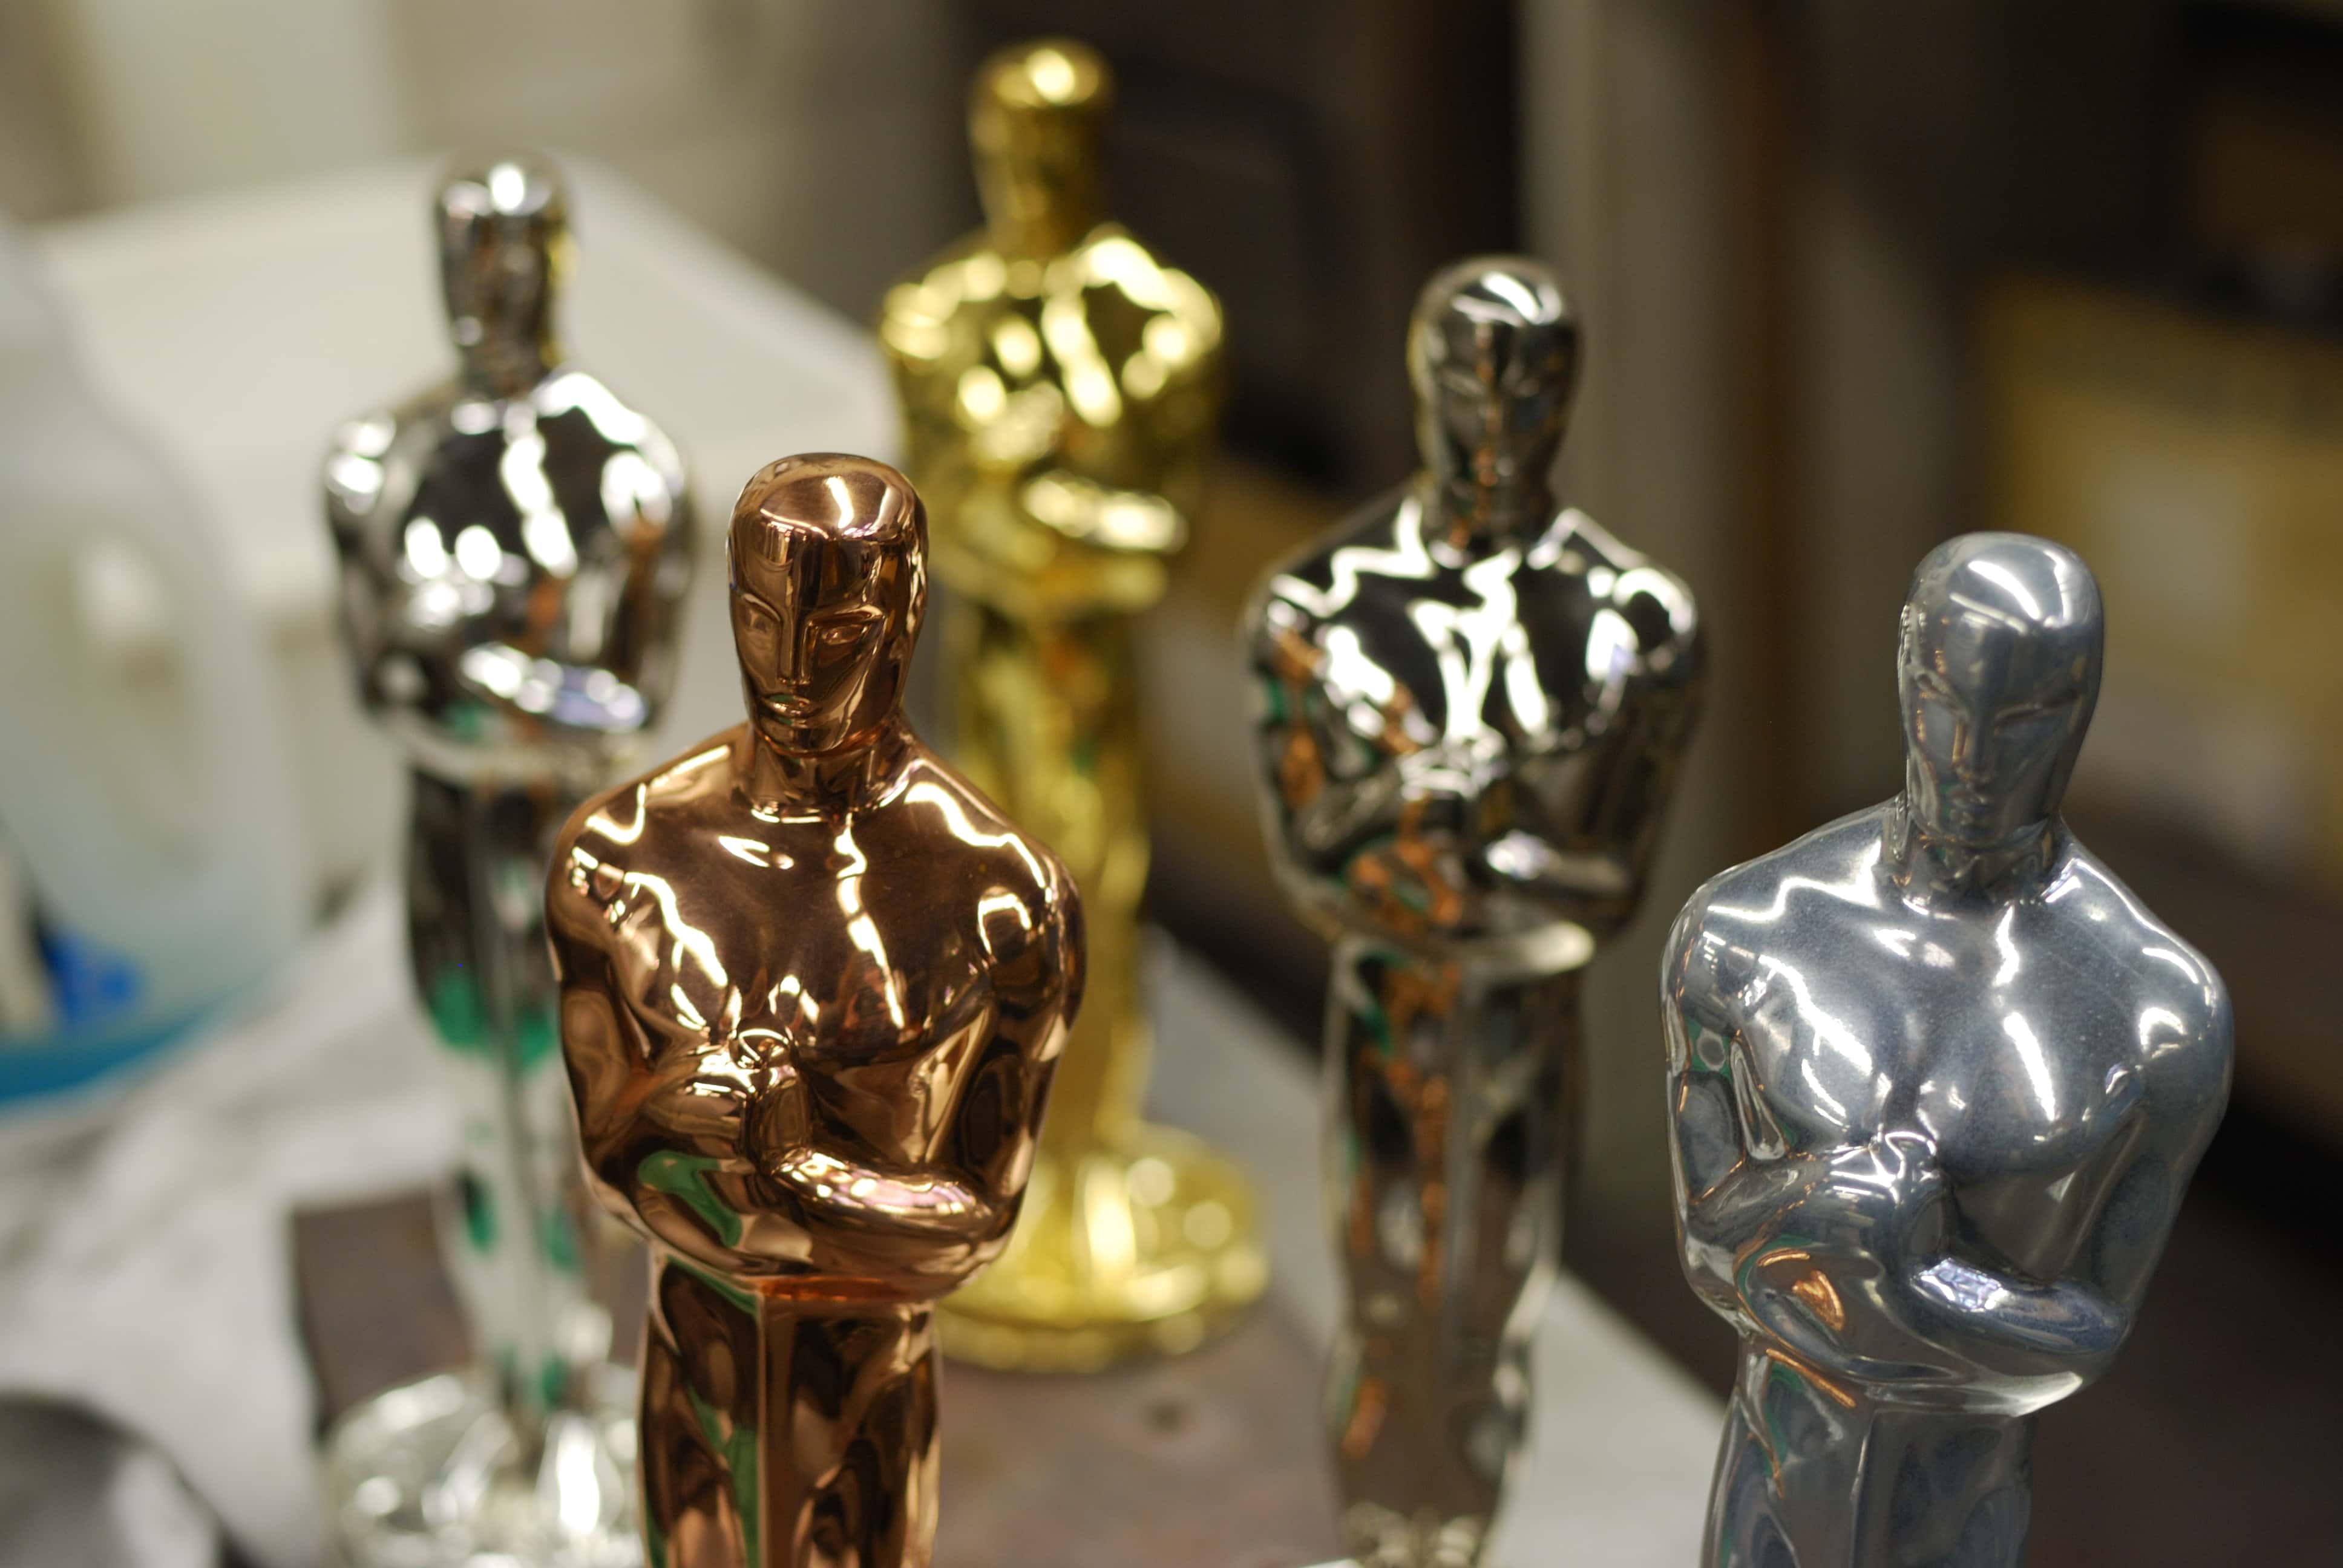 Oscar statuettes at various stages of plating - copper, nickel, silver and 24-carat gold.